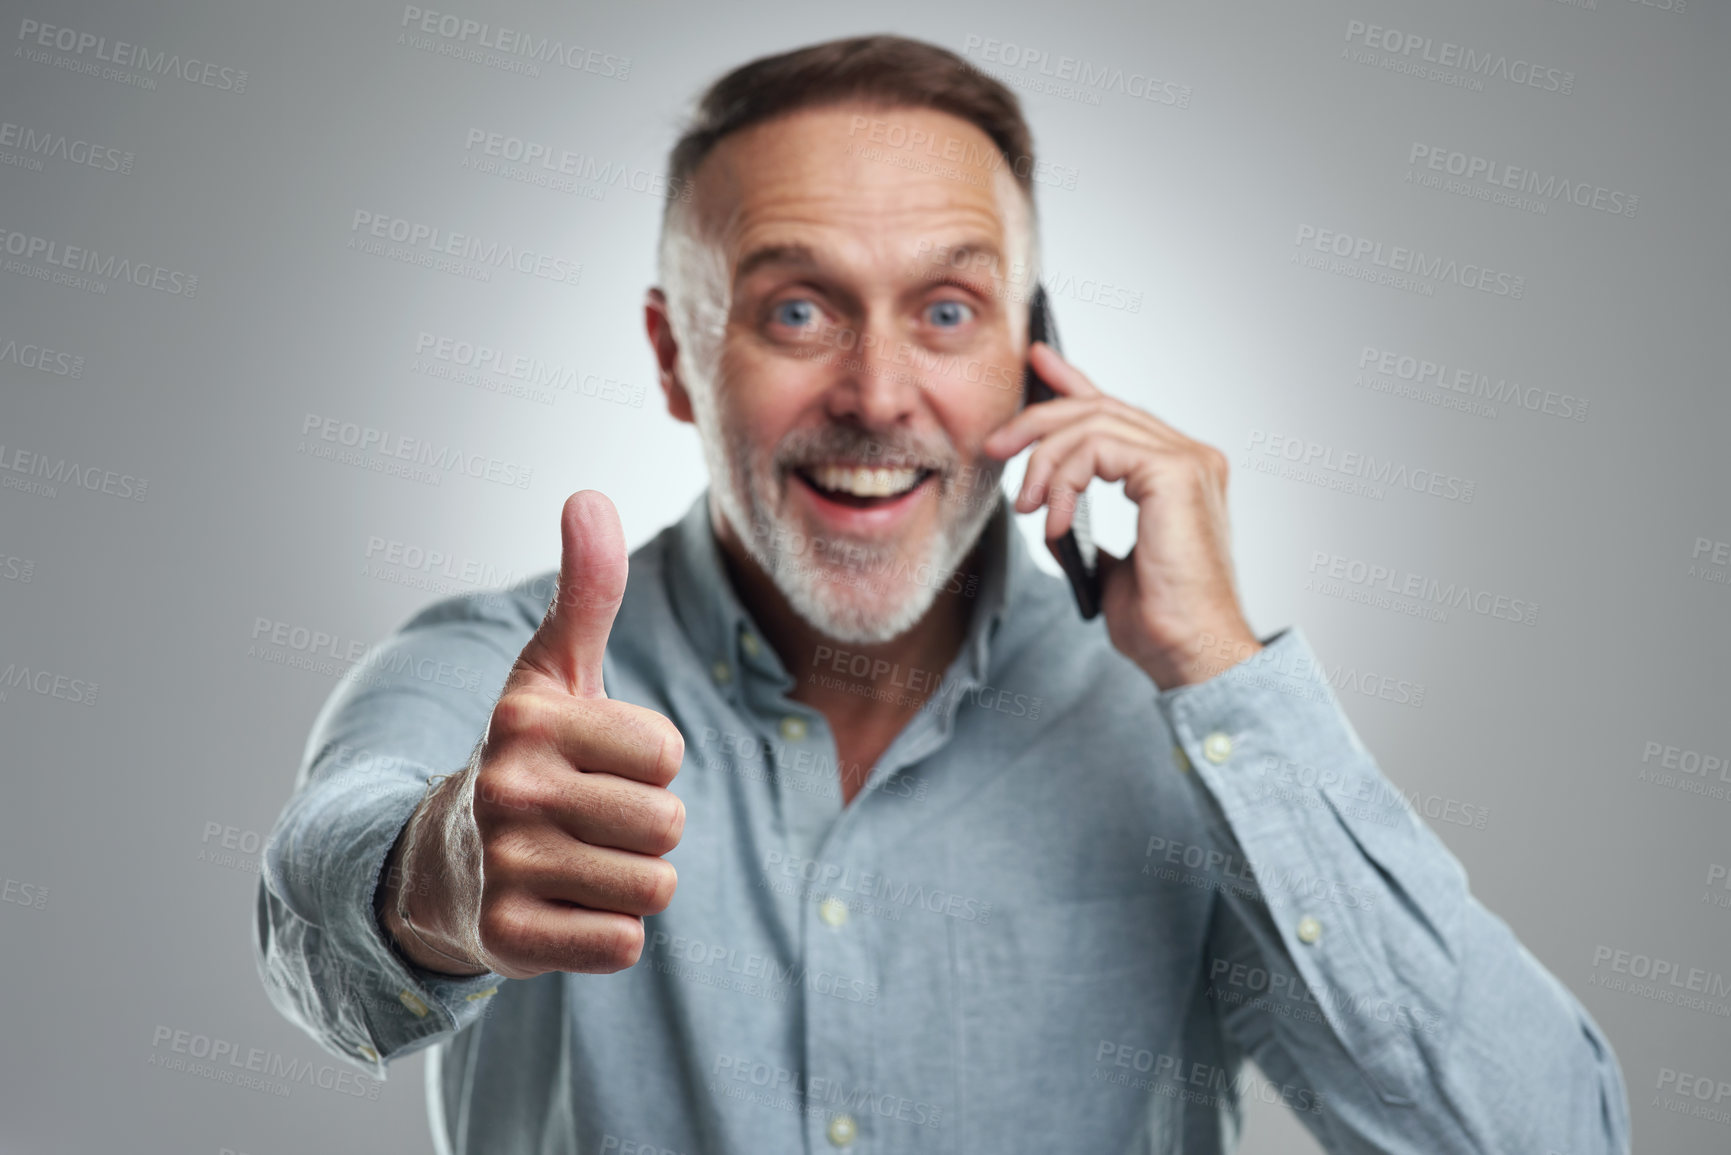 Buy stock photo Studio portrait of a mature man showing thumbs up while talking on a cellphone against a grey background